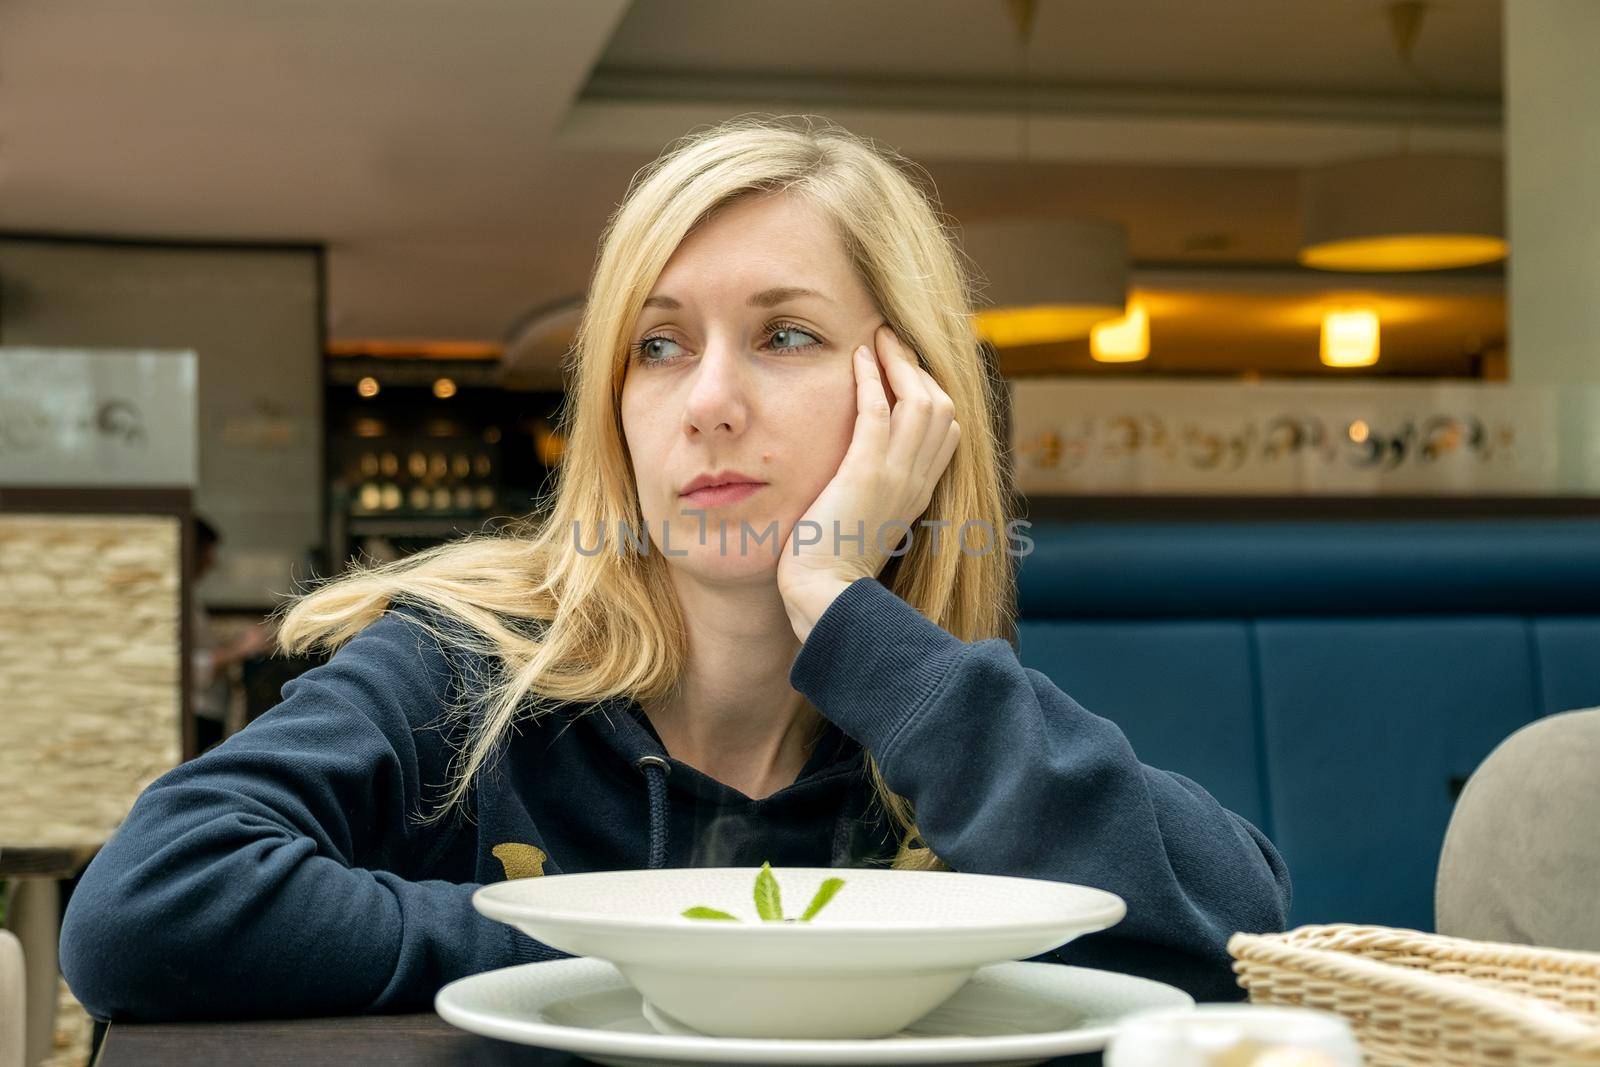 Blonde woman in a cafe with a plate of food by OlgaGubskaya